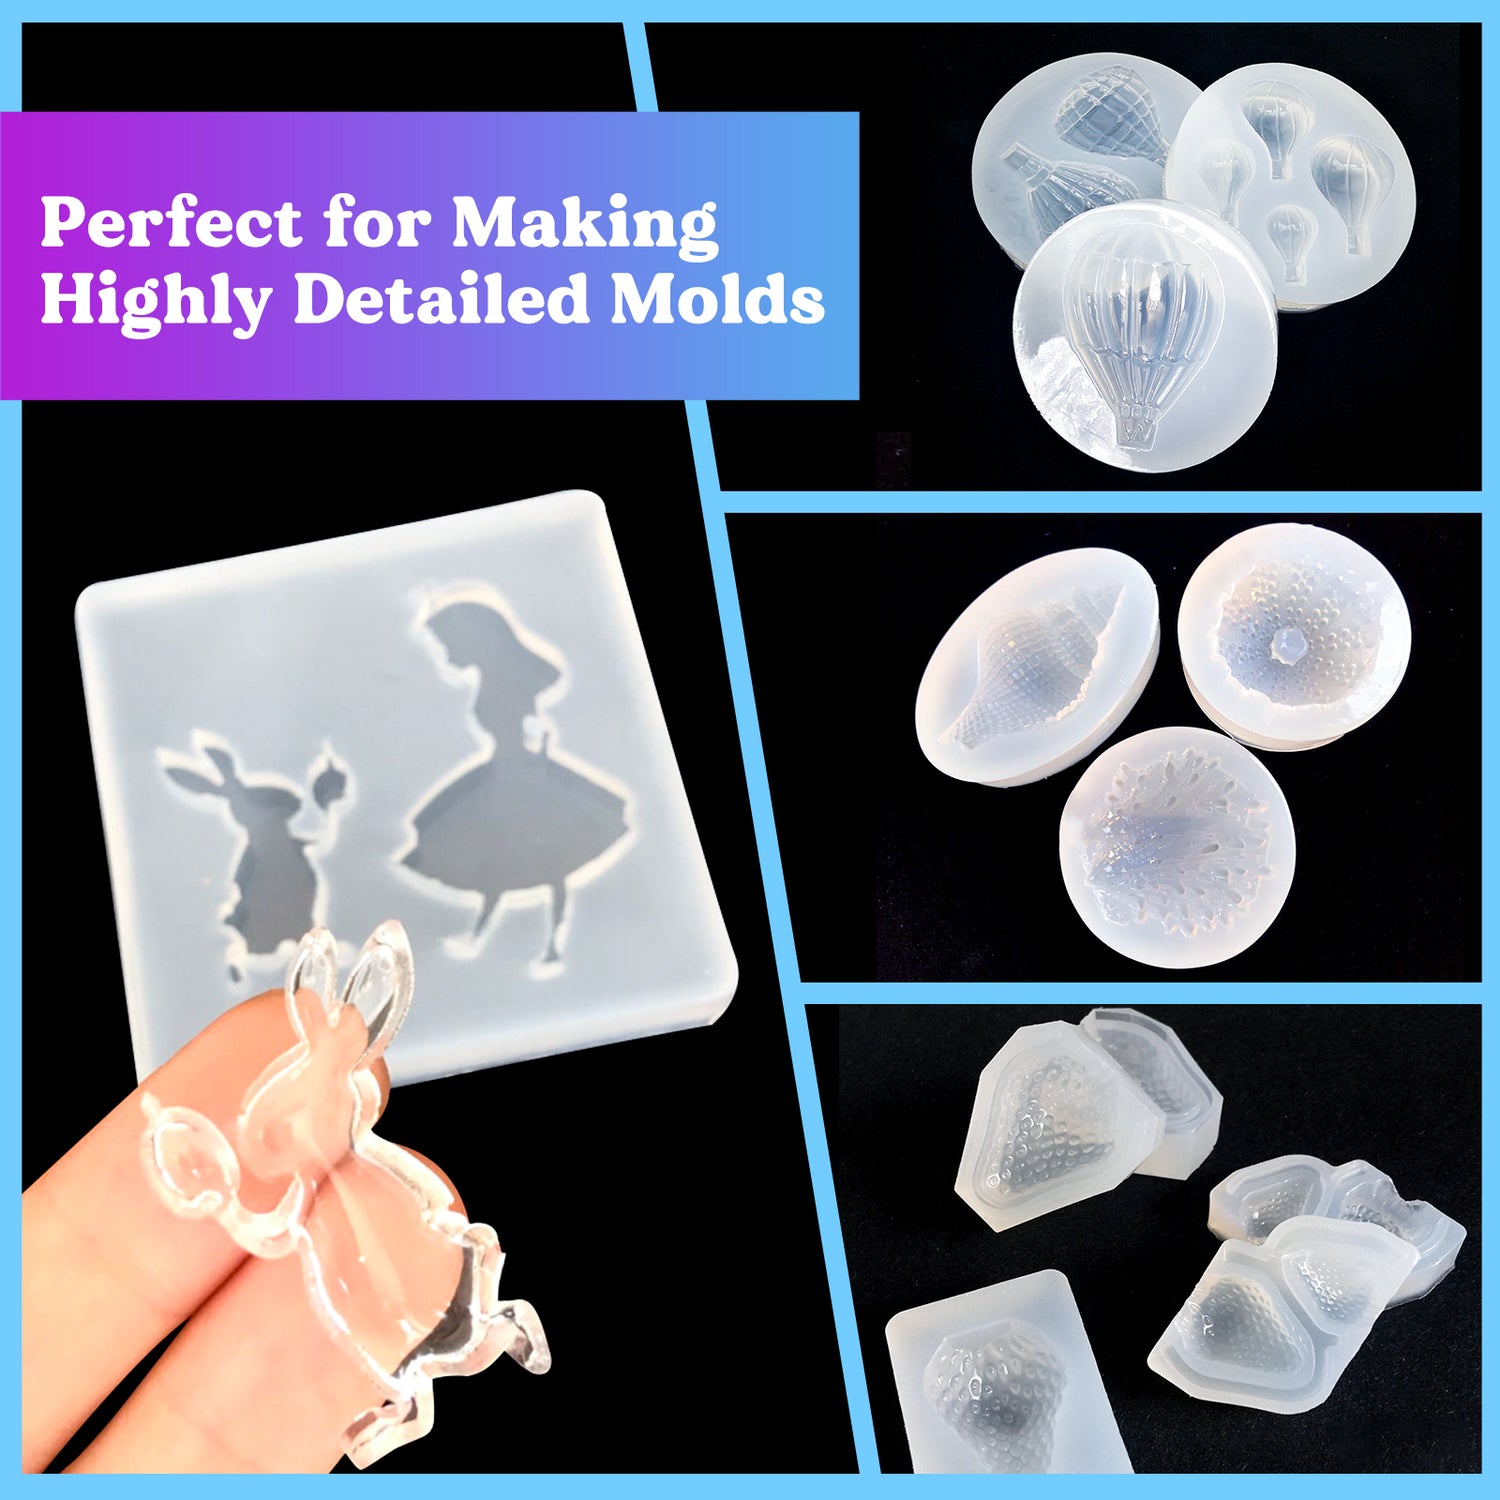 Silicone Mold Making Kit - N.W 21.16oz, Mixing Ratio 1:1, Translucent  Silicone Rubber, Non-Toxic Liquid, Resin Molds,Silicone Molds,DIY Manual  Making – Let's Resin